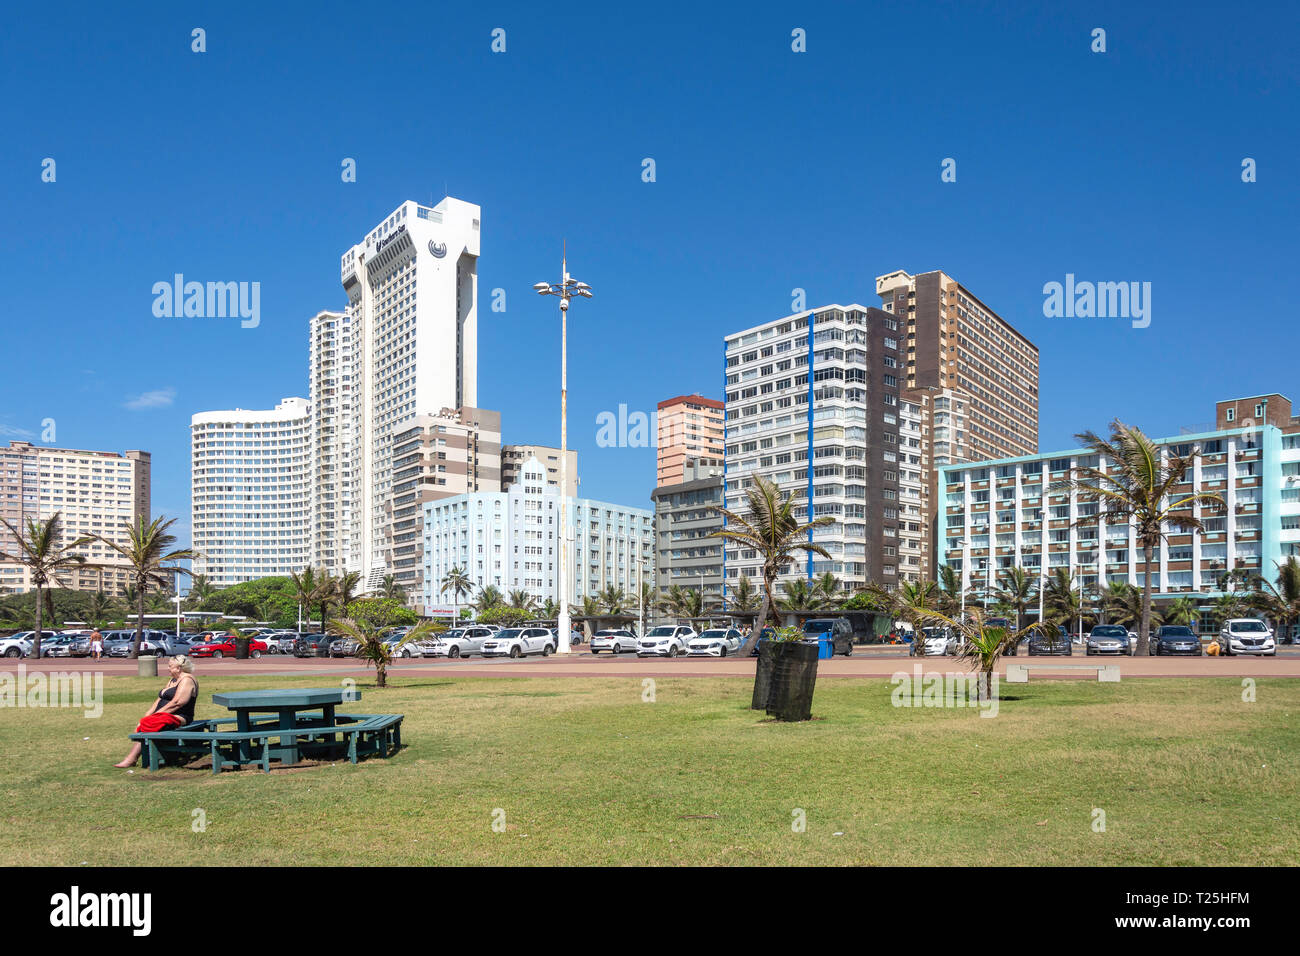 Seafront hotel and apartment buildings, Lower Marine Parade, Durban, KwaZulu-Natal, South Africa Stock Photo